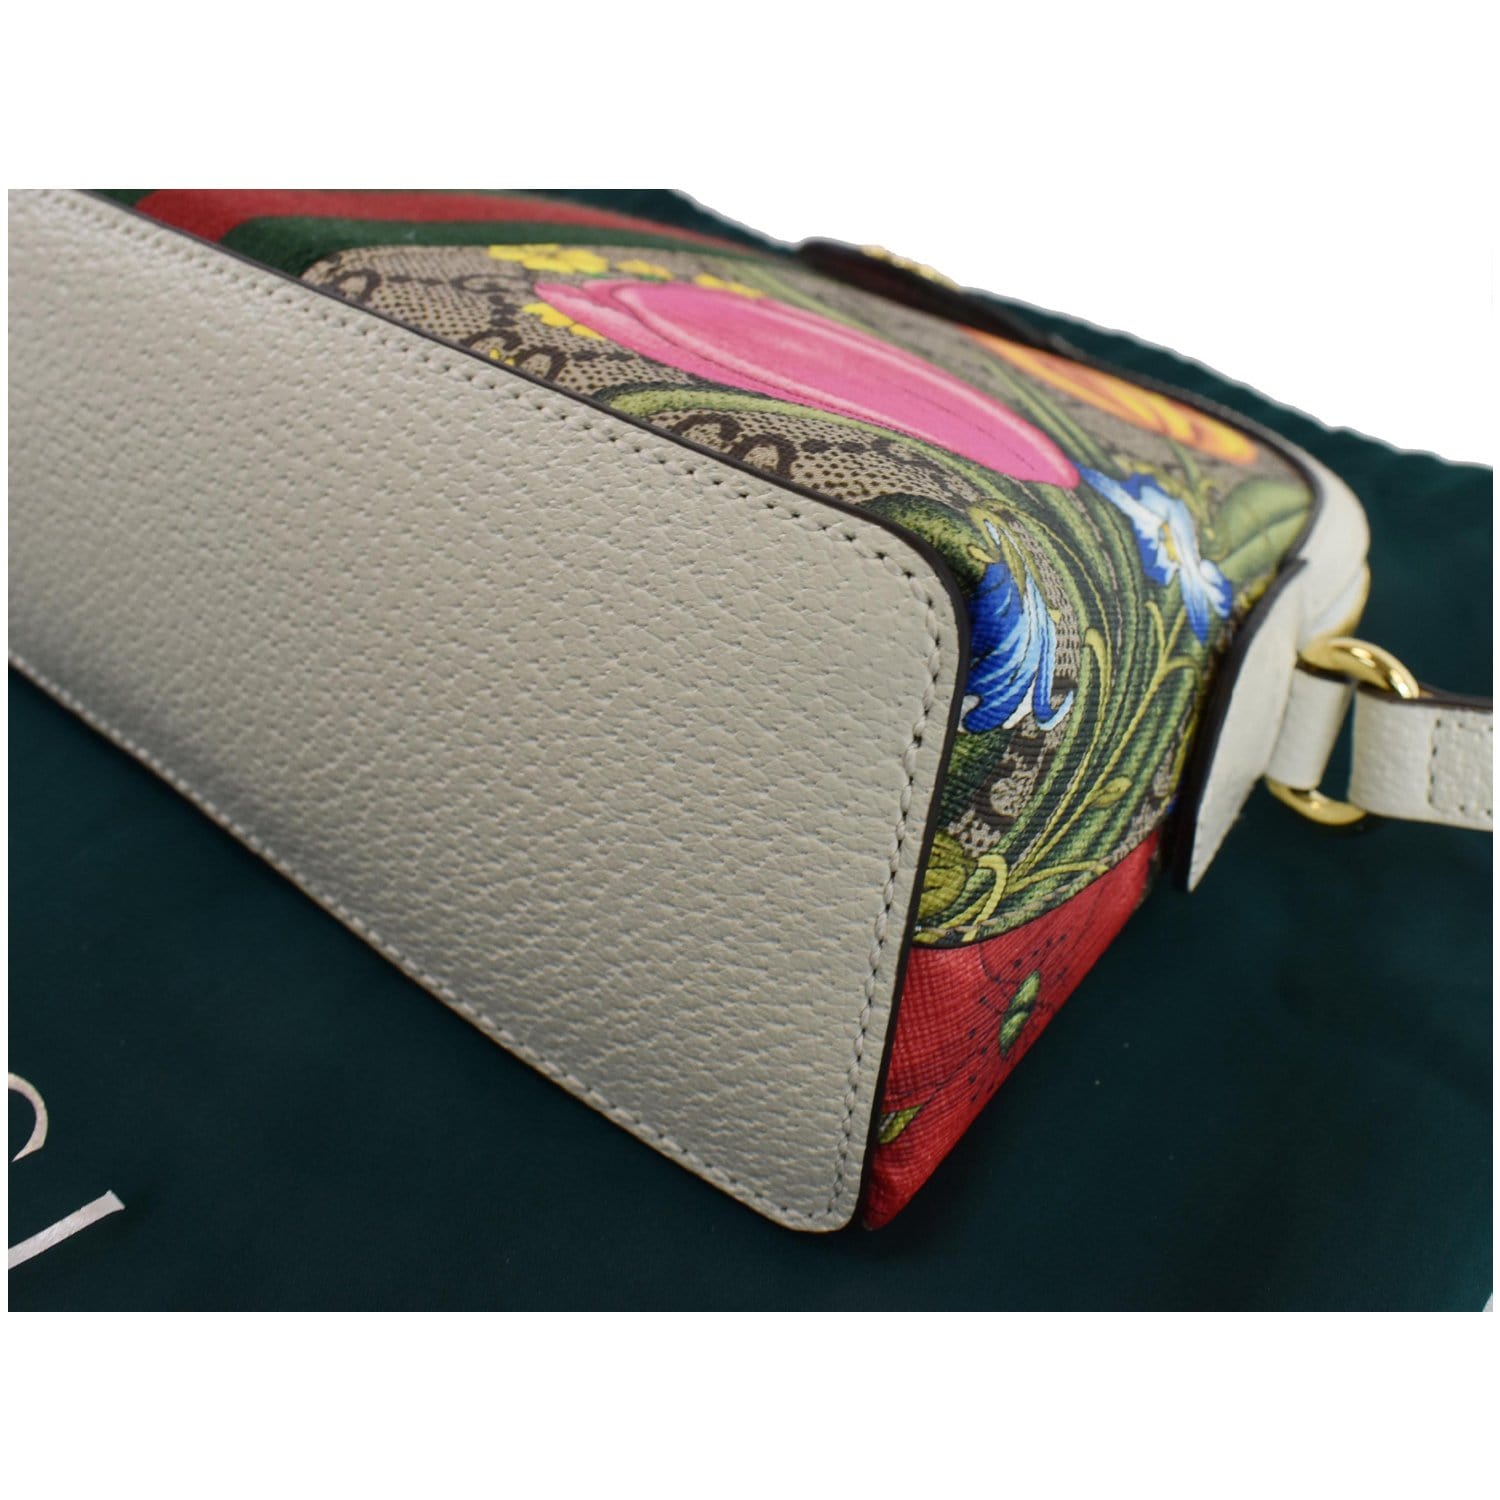 Gucci White GG Supreme Canvas and Leather Small GG Ophidia Floral